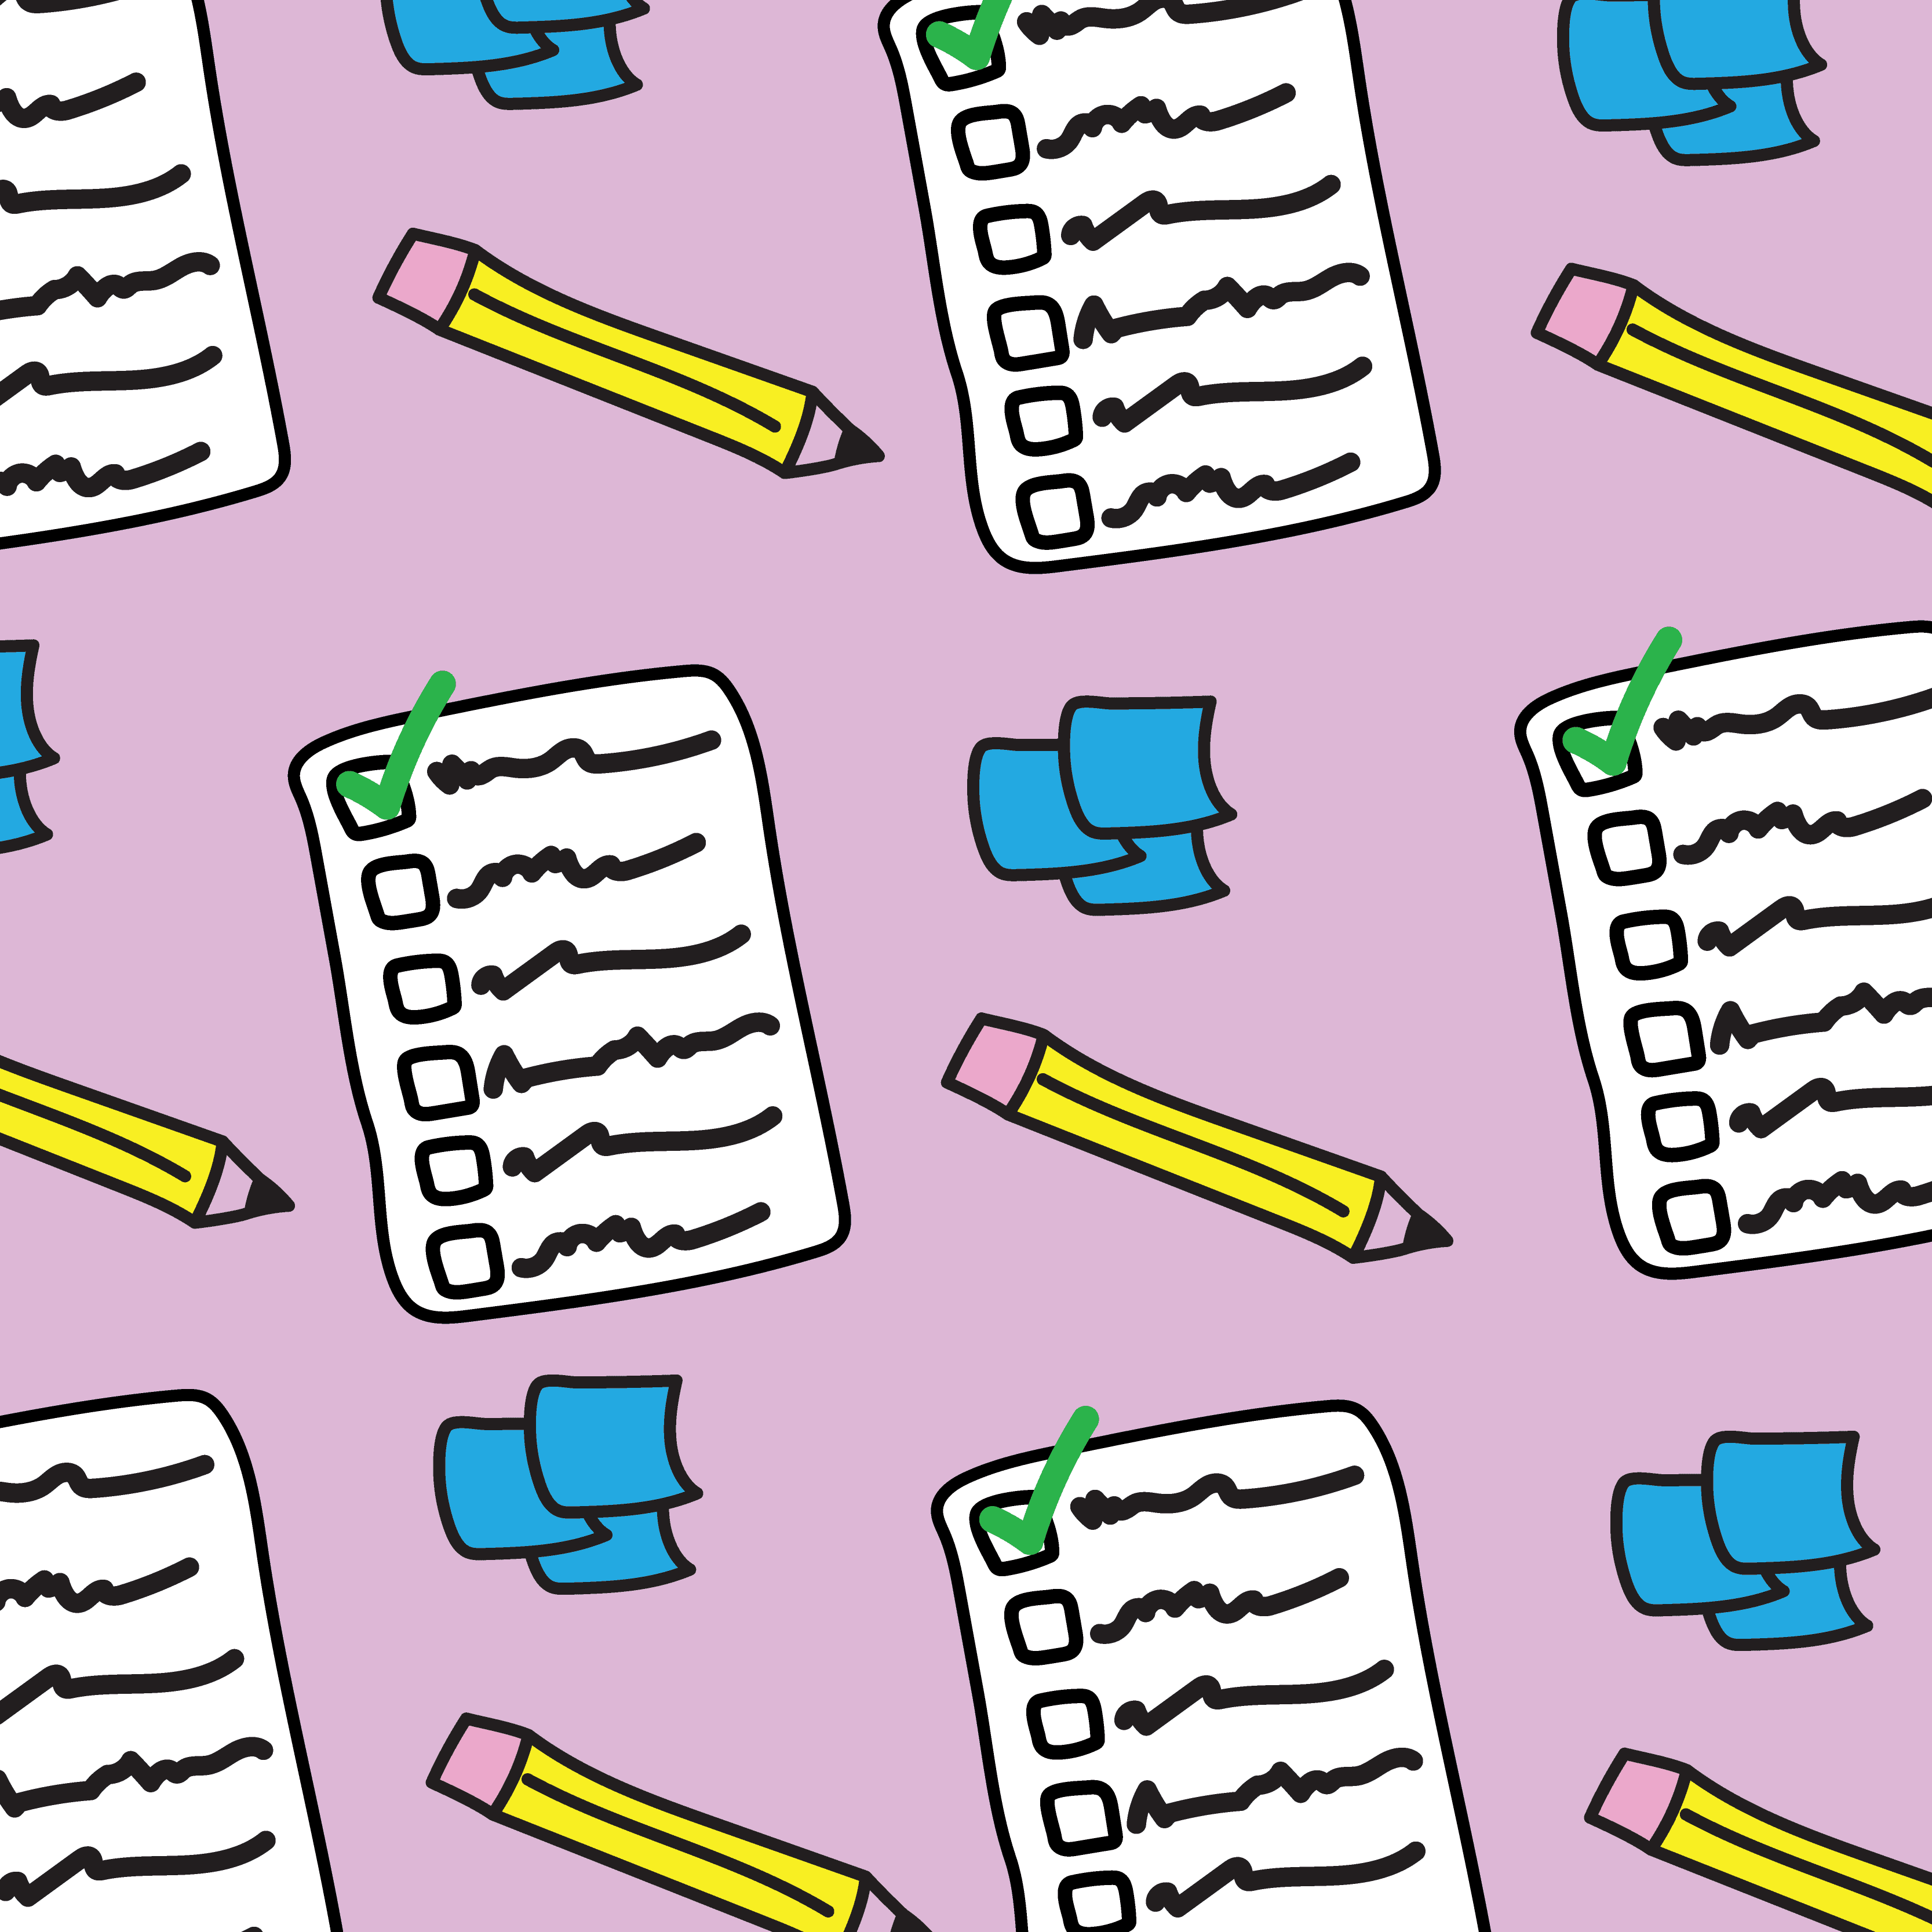 UseCase: Starting a UX project? Use this checklist